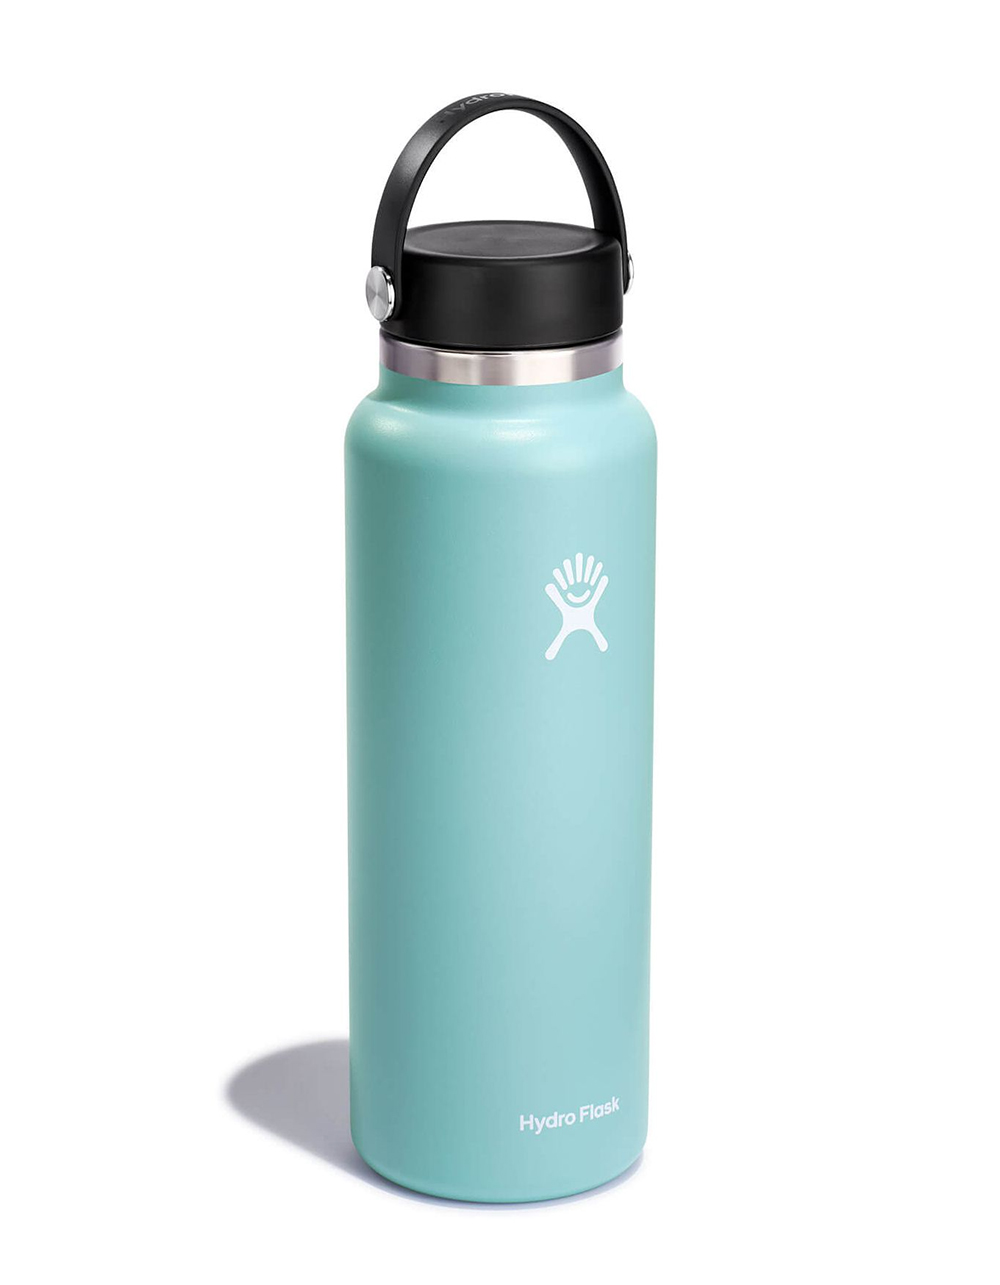 HYDRO FLASK Insulated Lunch Bag - LIGHT BLUE, Tillys, Salesforce Commerce  Cloud